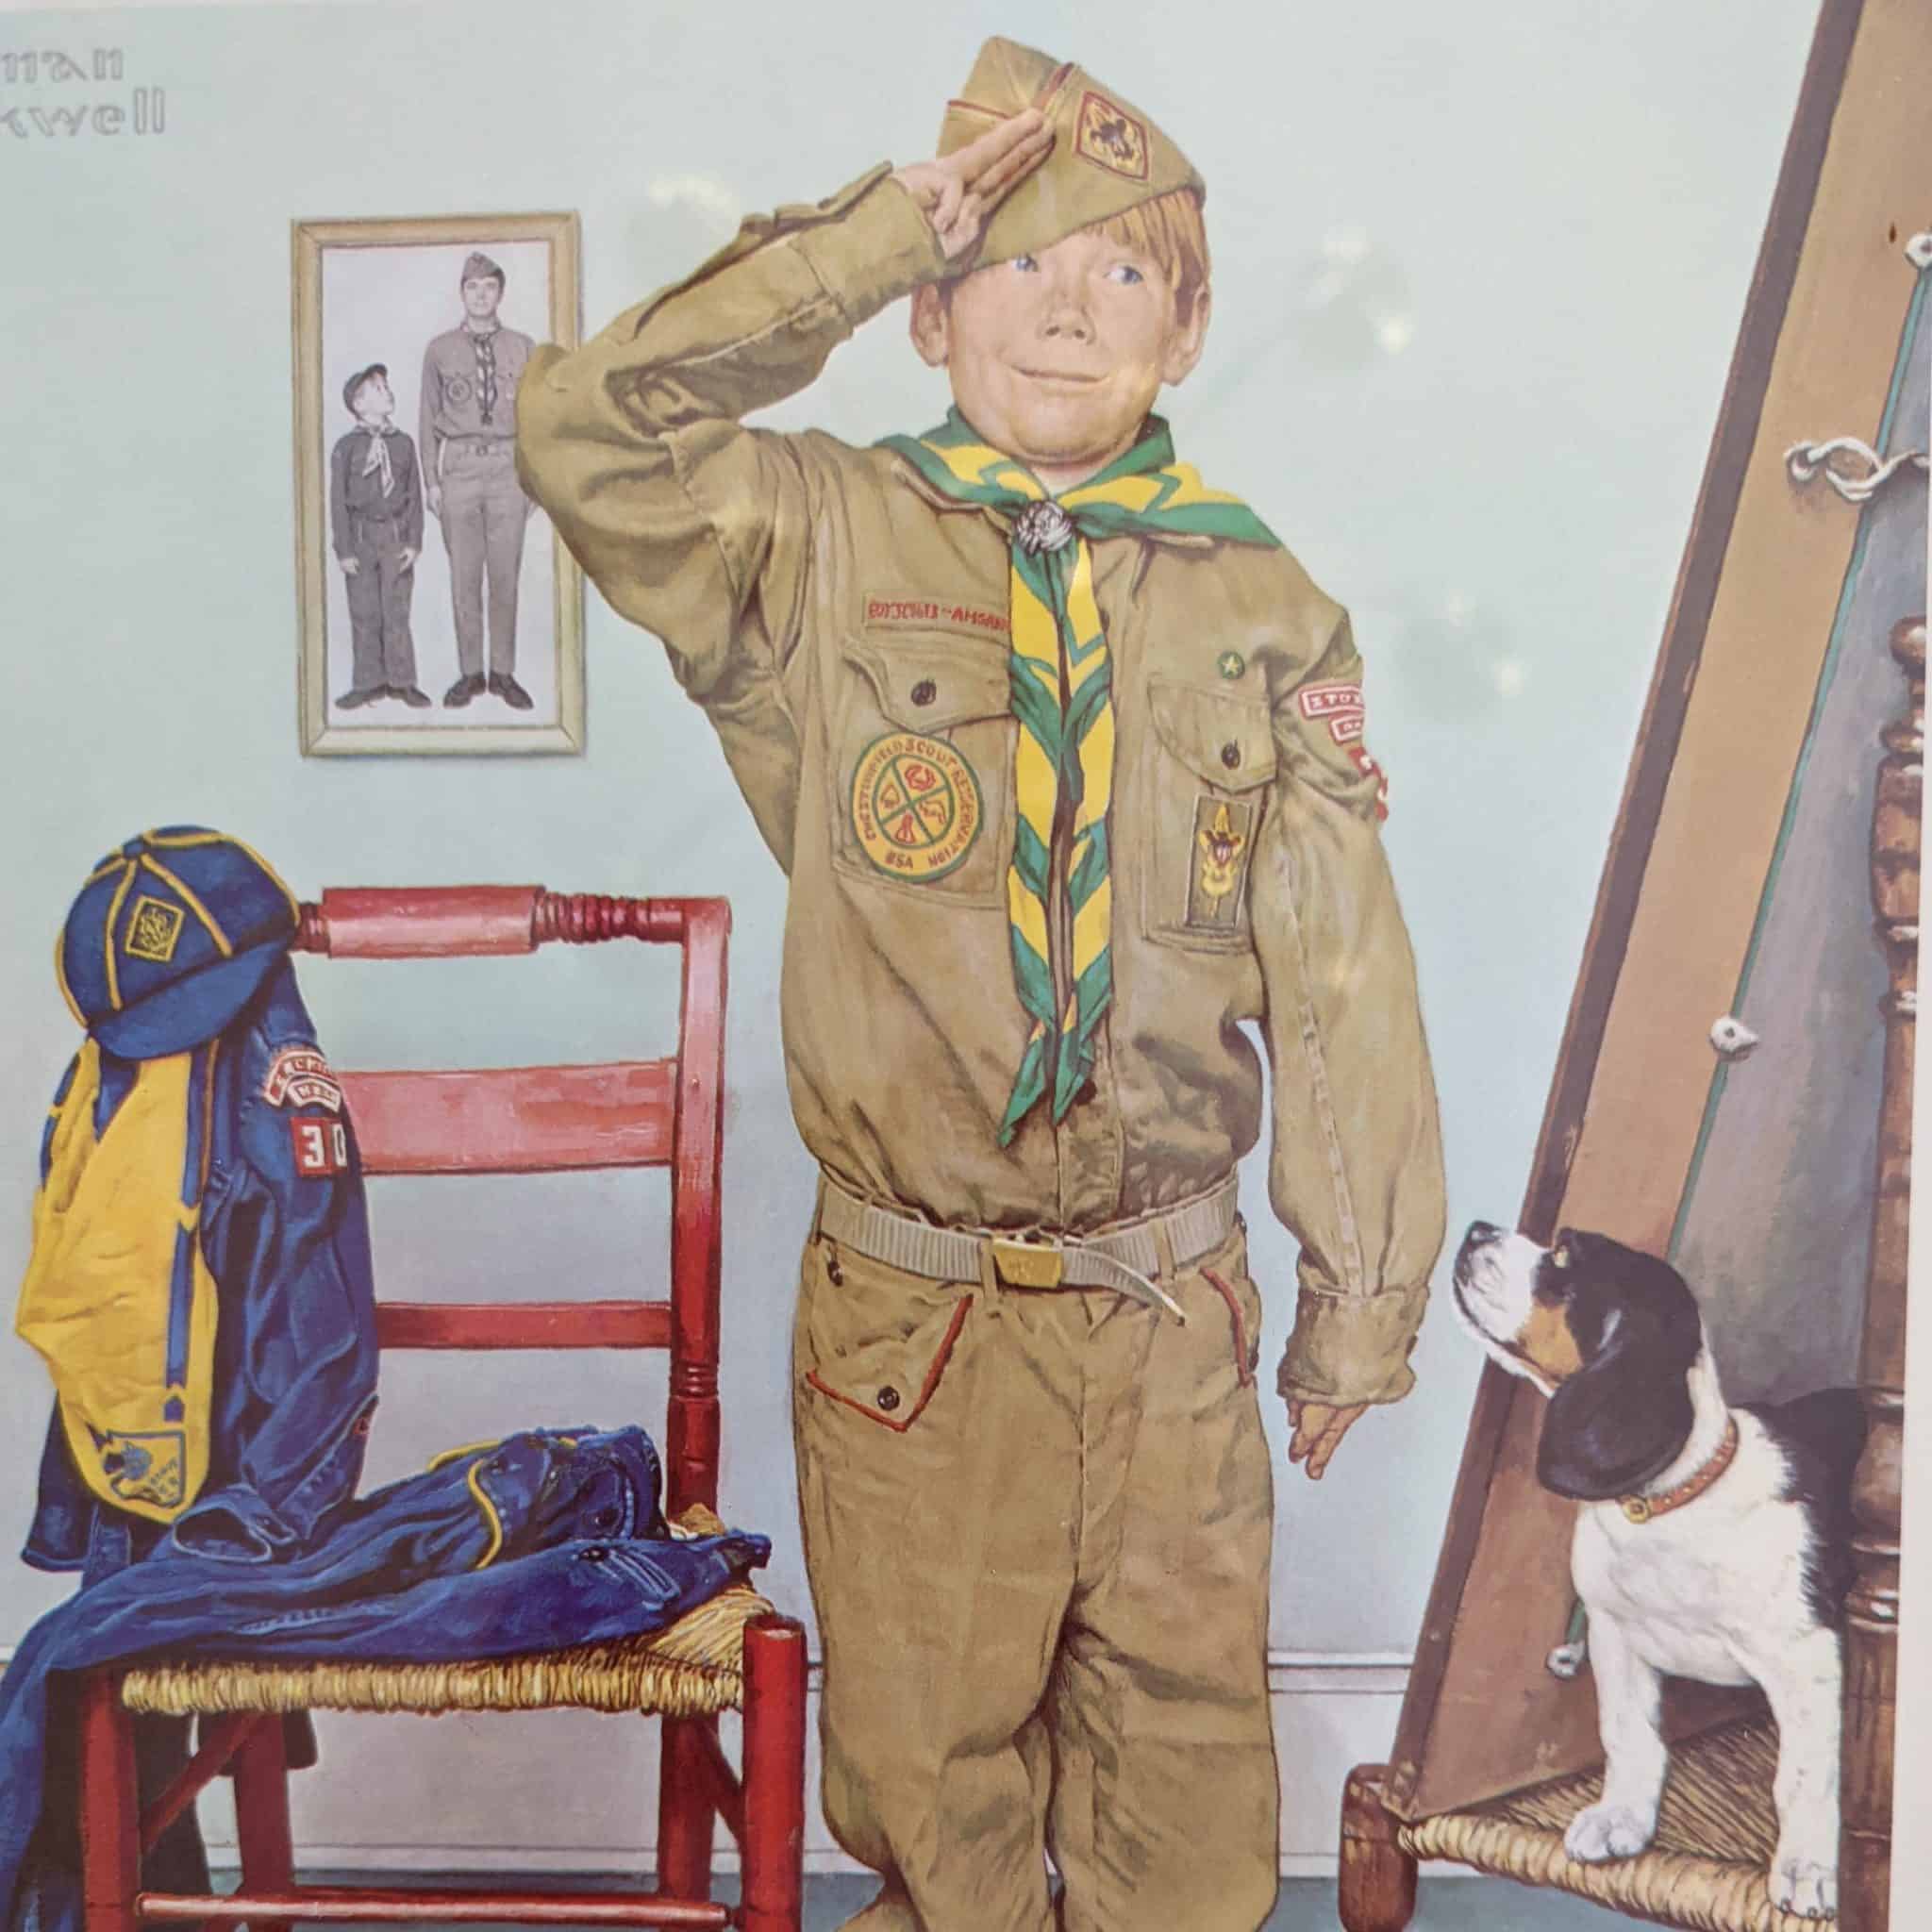 New Exhibit "History of Scouting in Westford"